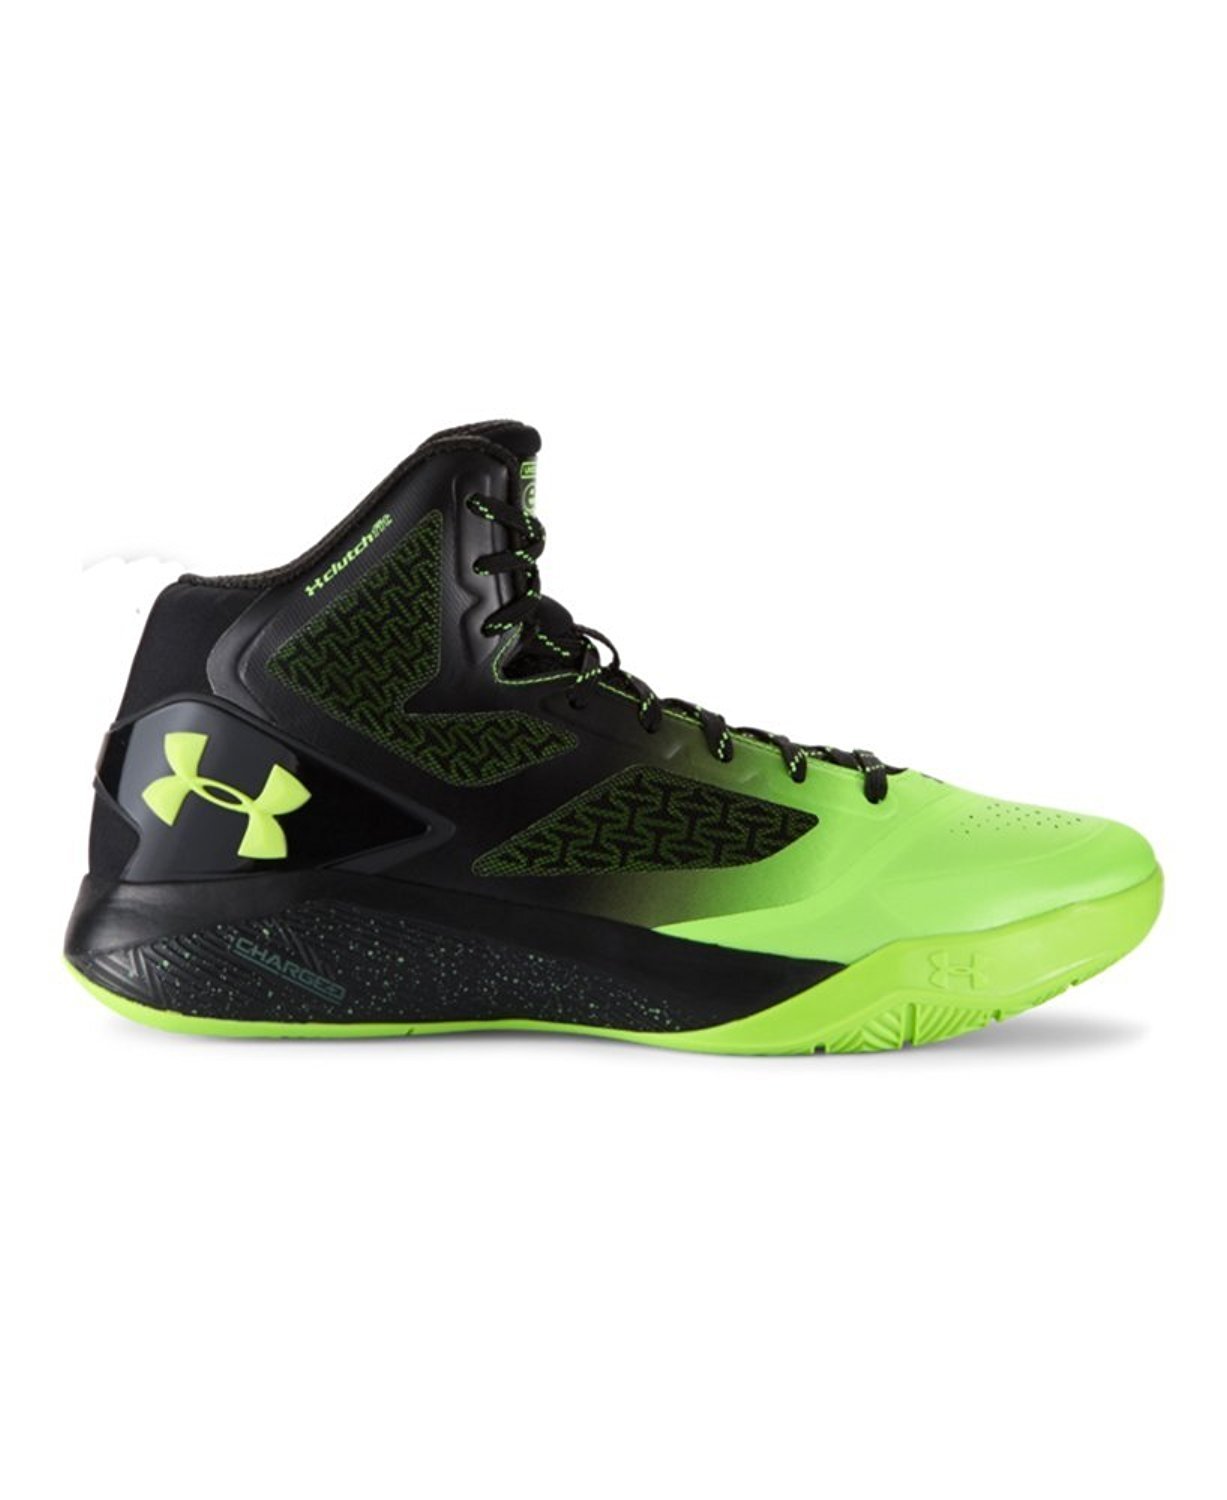 New In Box Under Armour Clutchfit Drive 2 Men's Basketball Shoes $125 Retail 